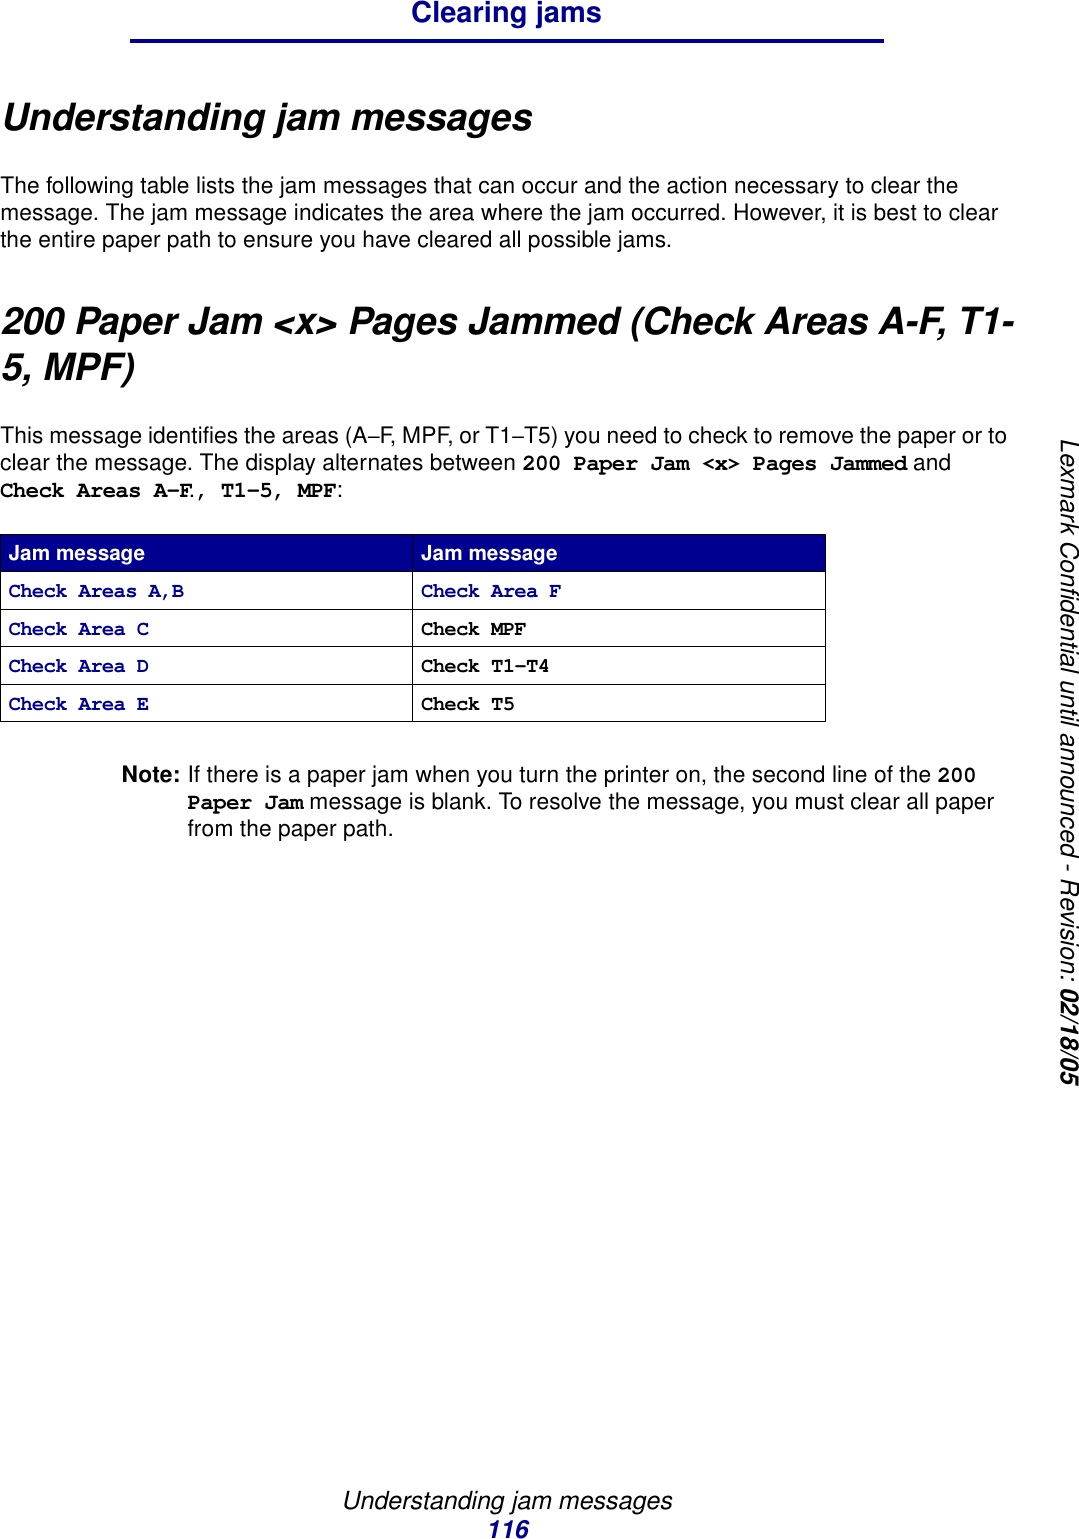 Understanding jam messages116Clearing jamsLexmark Confidential until announced - Revision: 02/18/05Understanding jam messagesThe following table lists the jam messages that can occur and the action necessary to clear the message. The jam message indicates the area where the jam occurred. However, it is best to clear the entire paper path to ensure you have cleared all possible jams.200 Paper Jam &lt;x&gt; Pages Jammed (Check Areas A-F, T1-5, MPF)This message identifies the areas (A–F, MPF, or T1–T5) you need to check to remove the paper or to clear the message. The display alternates between 200 Paper Jam &lt;x&gt; Pages Jammed and Check Areas A-F., T1-5, MPF:Note: If there is a paper jam when you turn the printer on, the second line of the 200 Paper Jam message is blank. To resolve the message, you must clear all paper from the paper path.Jam message Jam messageCheck Areas A,B Check Area FCheck Area C Check MPFCheck Area D Check T1–T4Check Area E Check T5